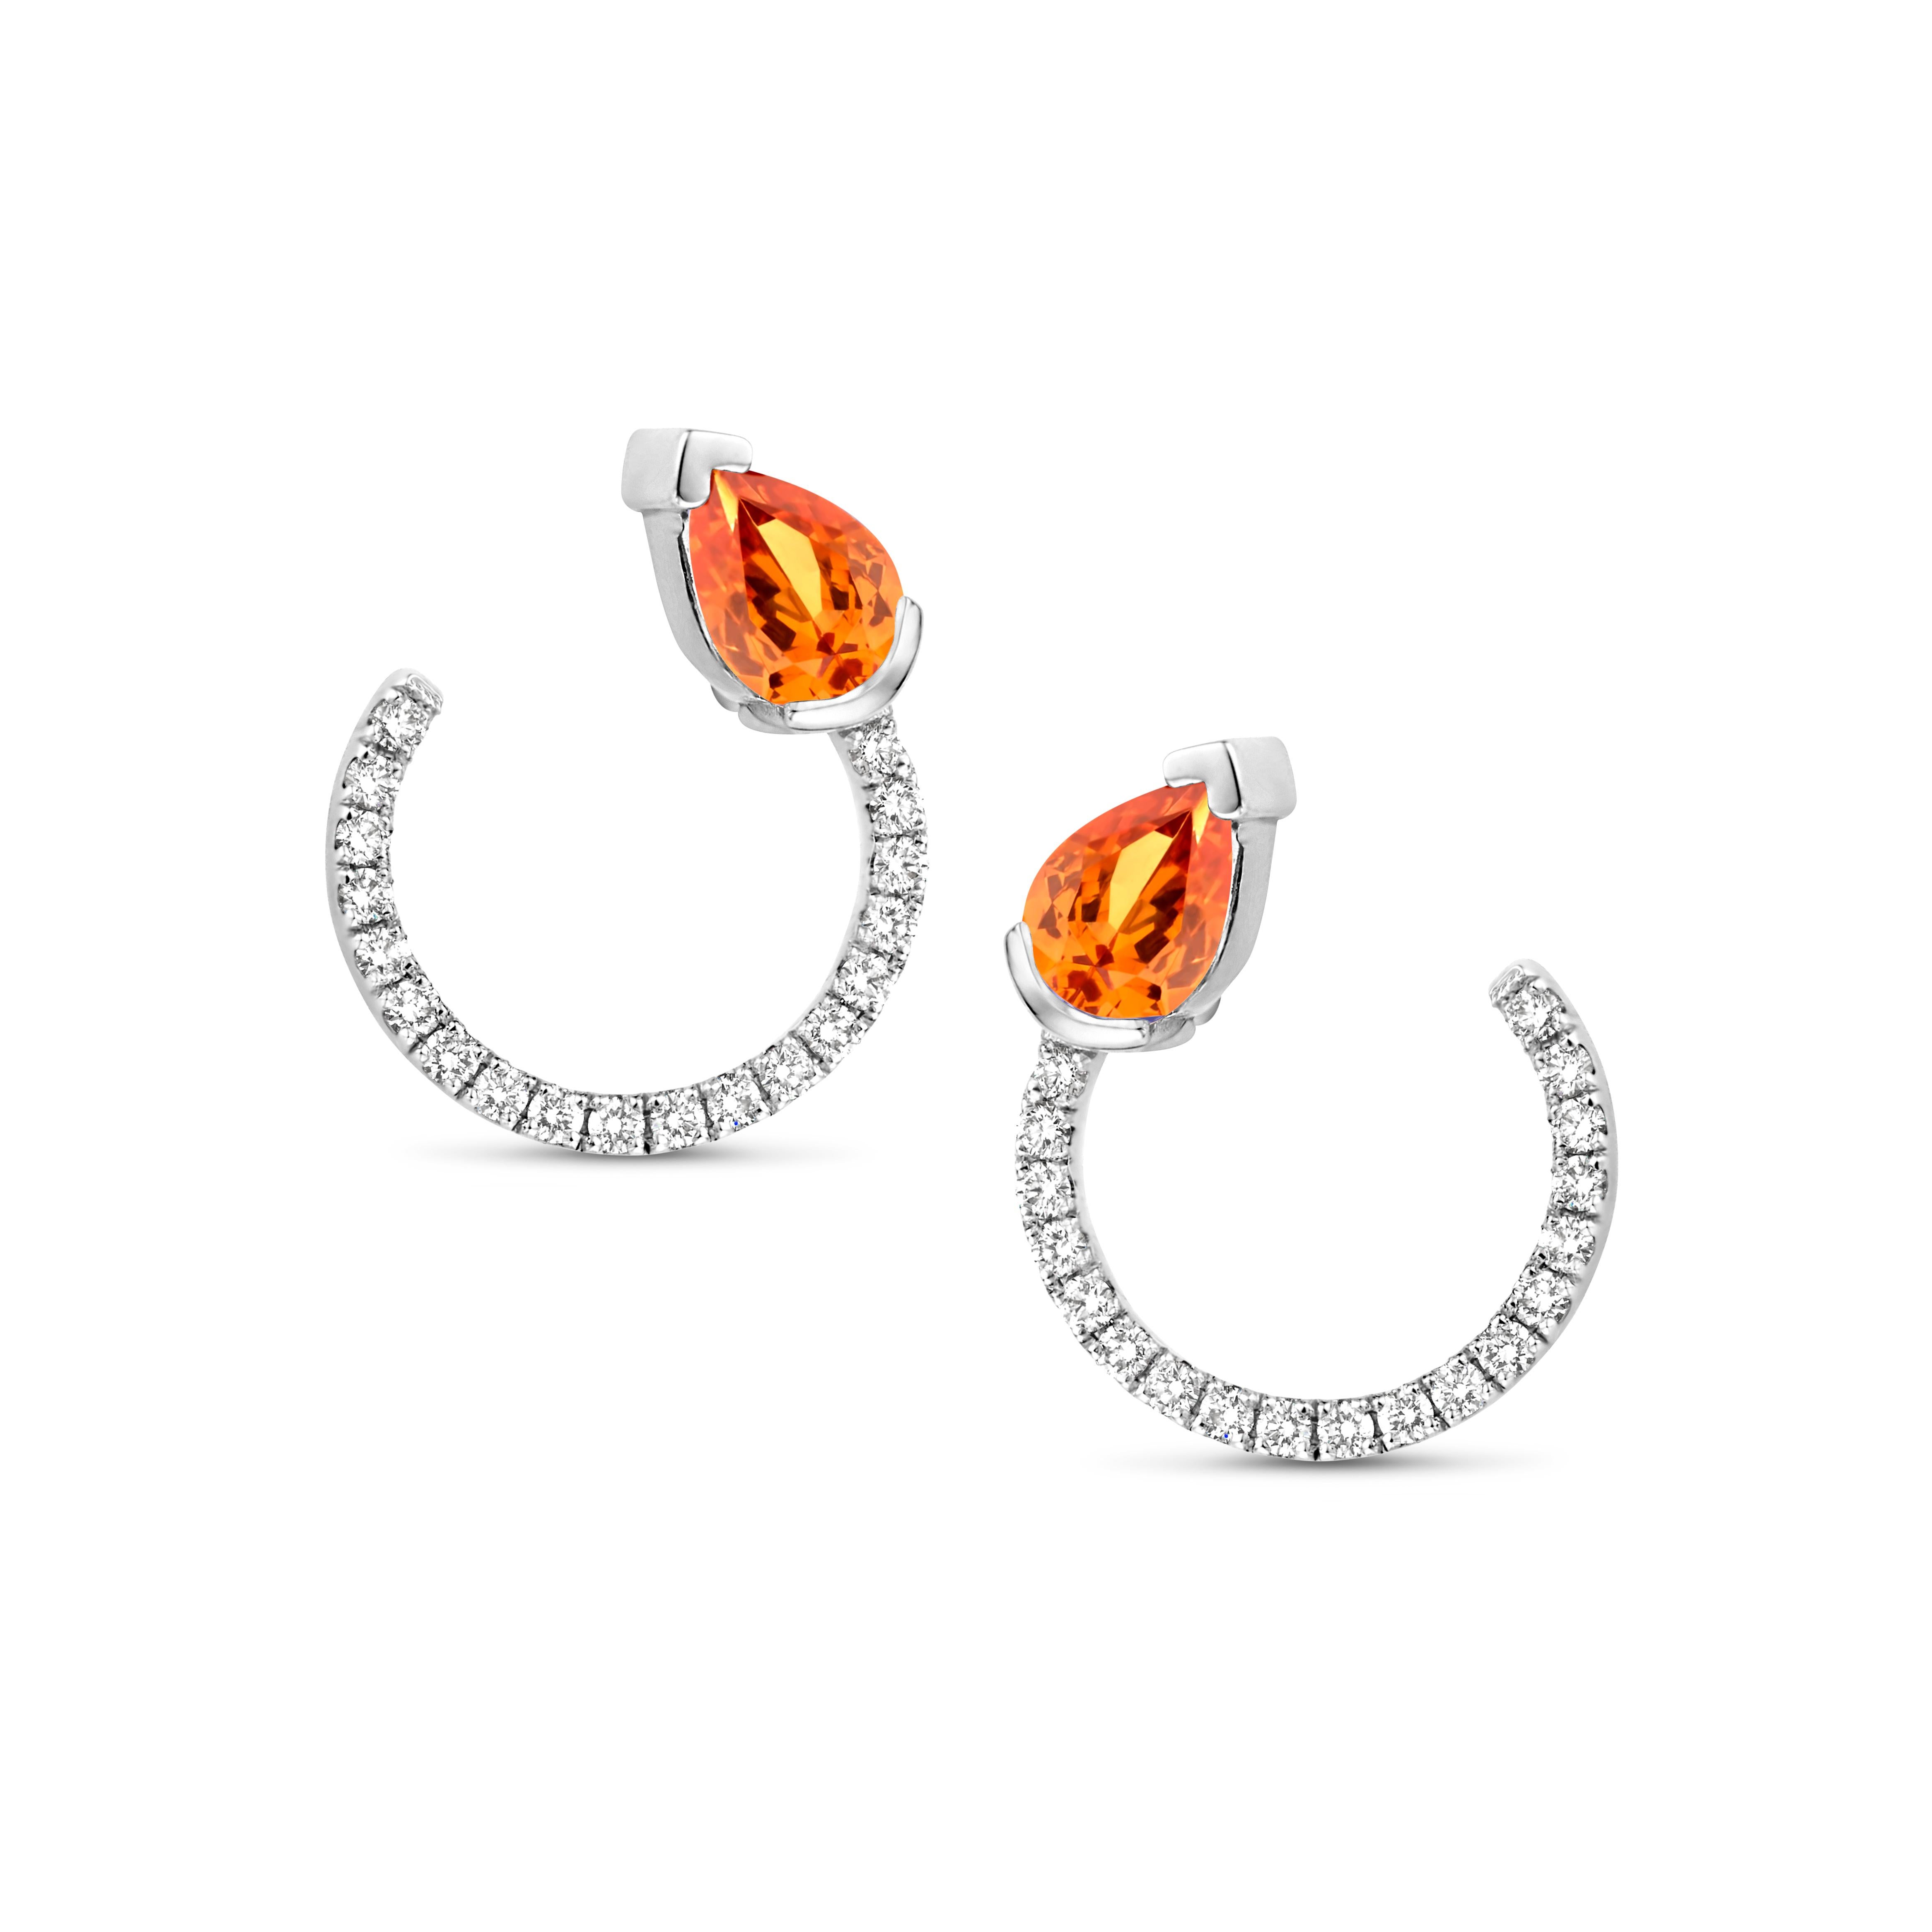 18K rose gold curved earrings with a pear shaped mandarin garnet 0,78ct and diamonds 0,30ct VS-FG brilliant cut. Also, available in white gold and yellow gold.

Celine Roelens, a goldsmith and gemologist, is specialized in unique, fine jewelry,